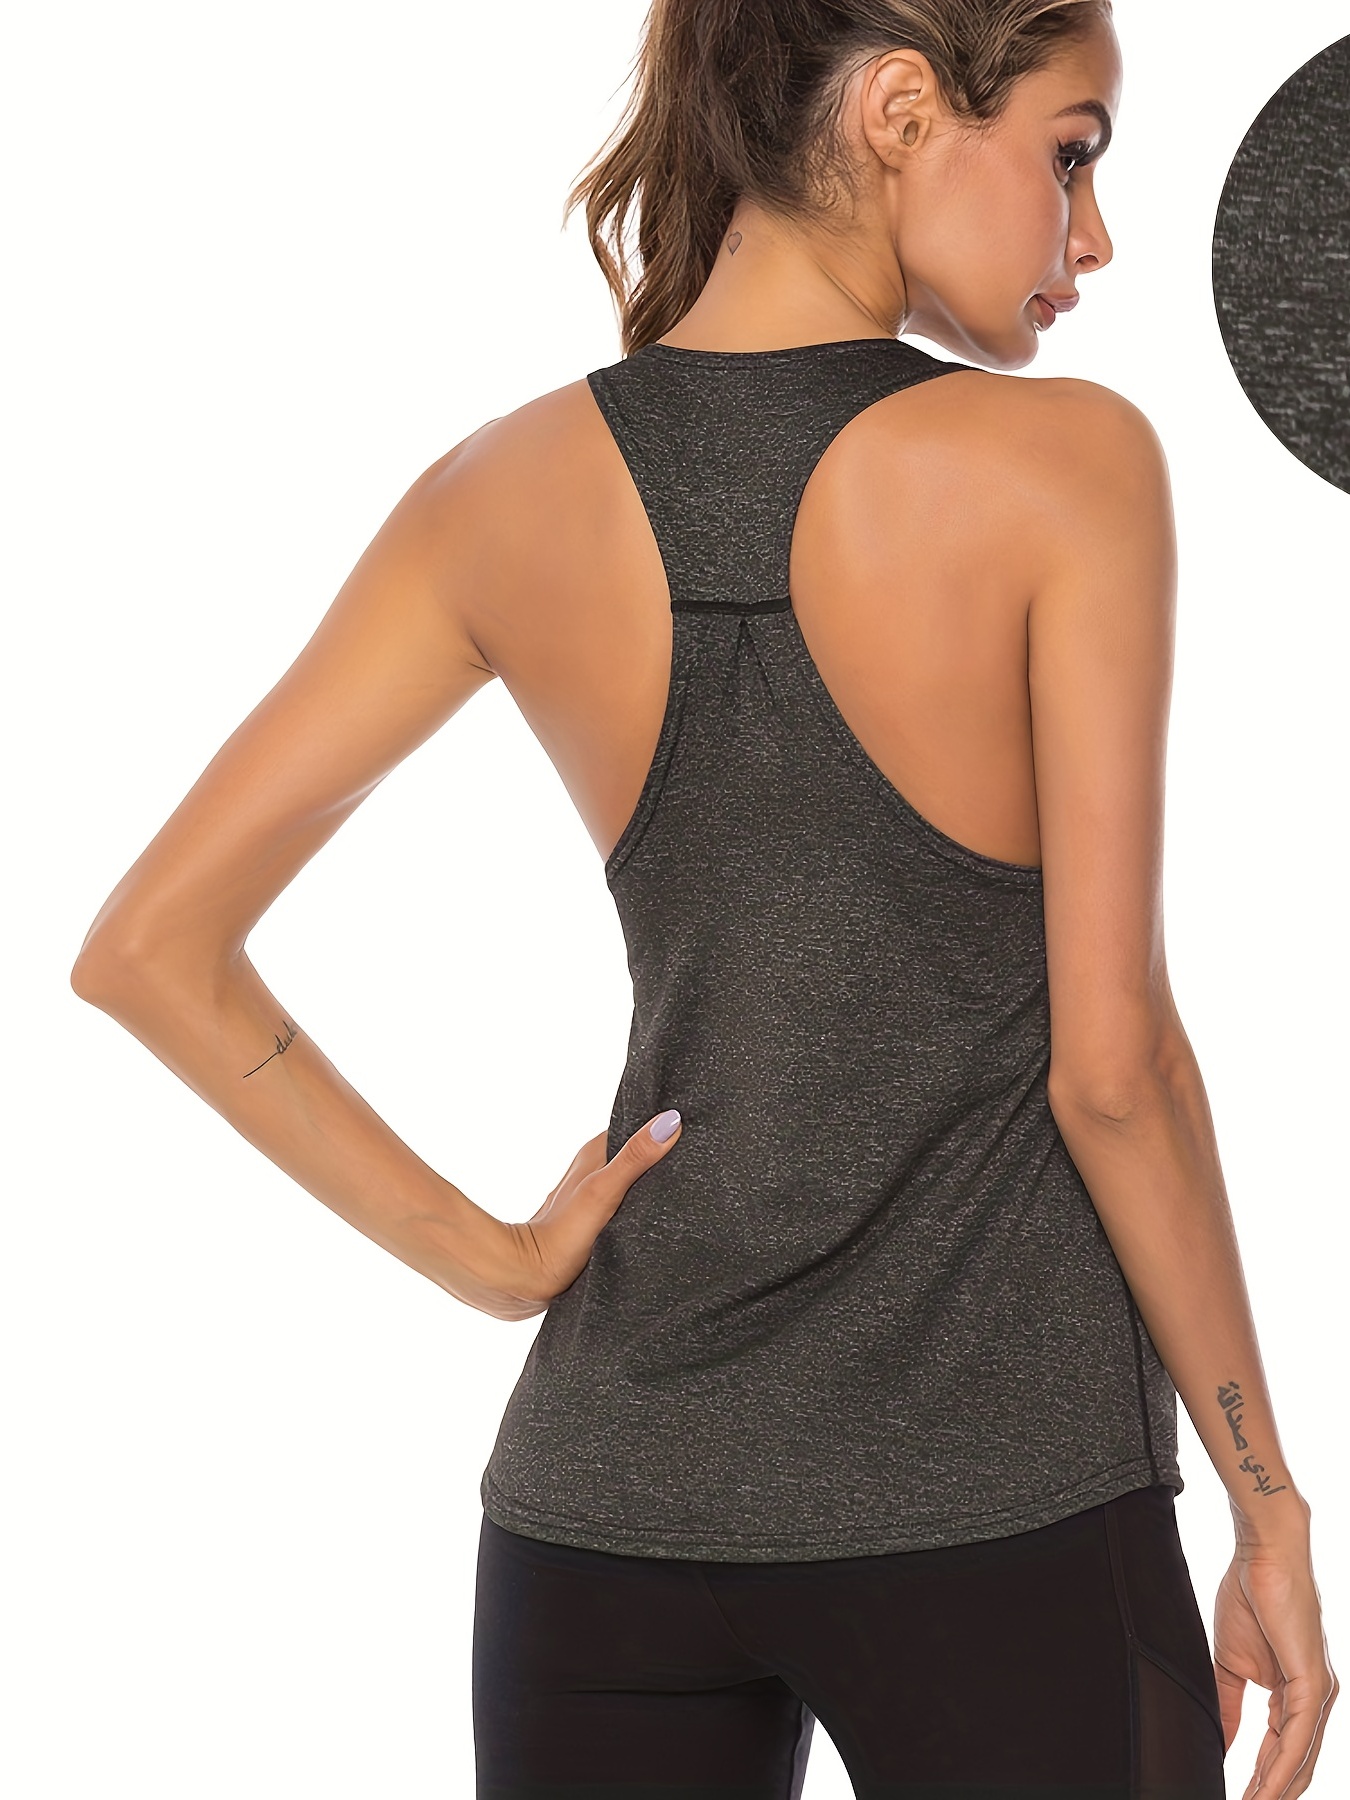 Does Running Late Count as Exercise, Racerback Tanks for Women, Running Tank  Top, Racerback Tank, Racerback Tanks for Women, Yoga Tank Top 